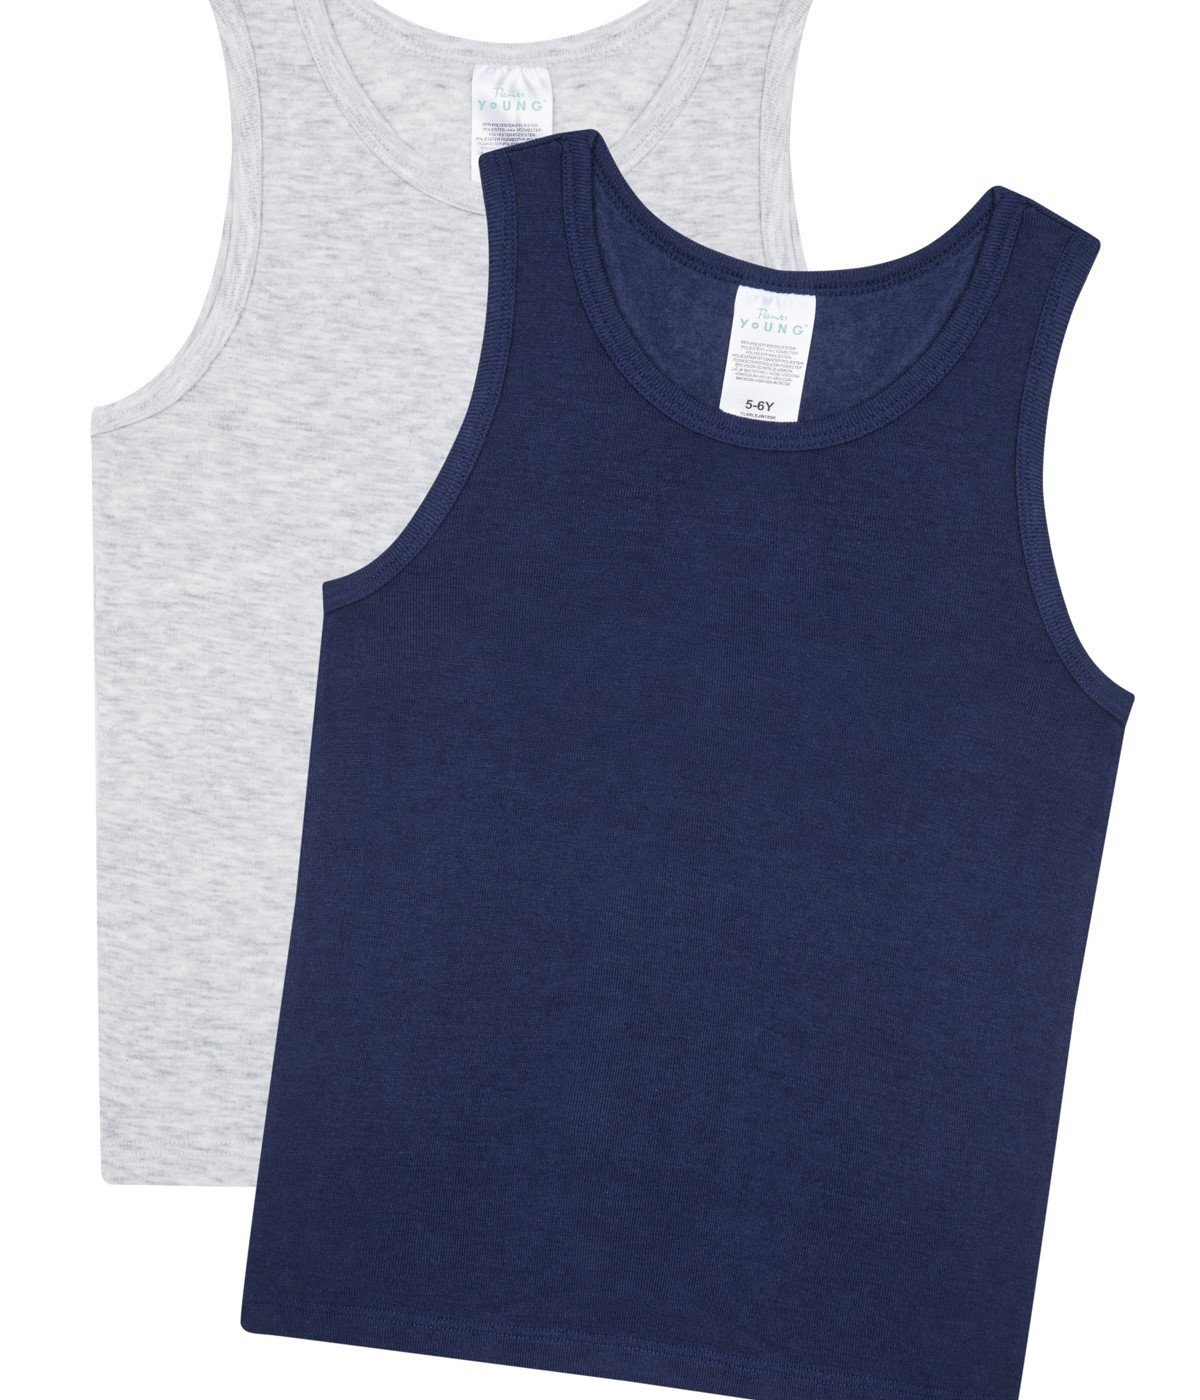 Boys Mix Tank with Thermal 2 In 1